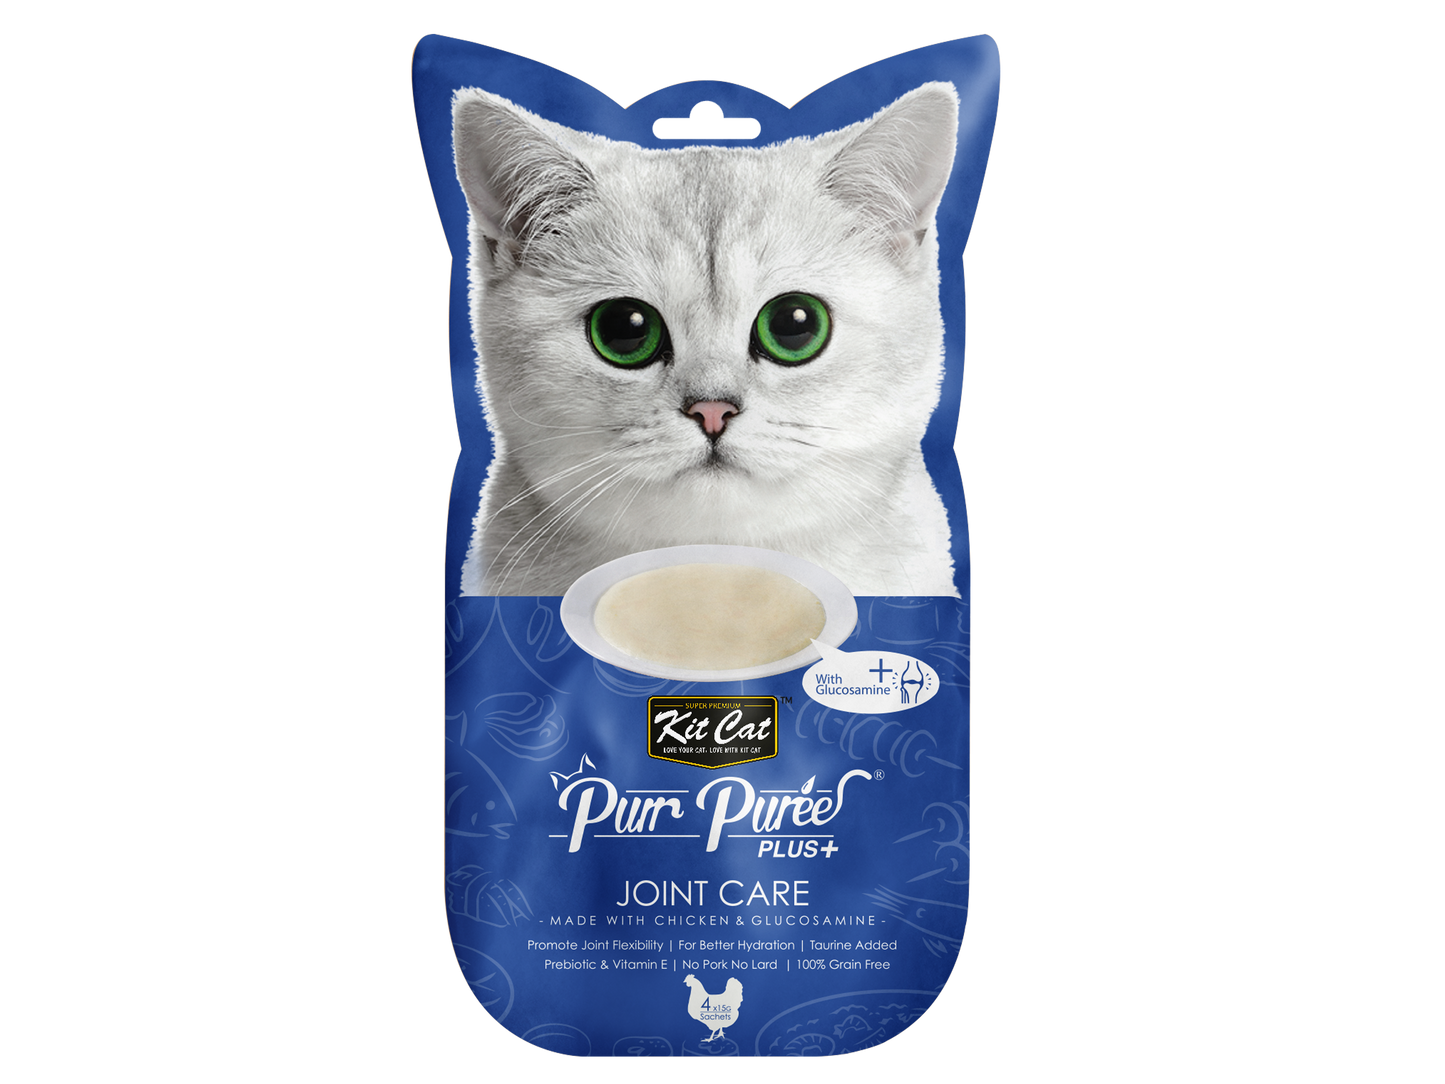 [As Low As $3.30 Each] Kit Cat Purr Puree Plus+ Chicken & Glucosamine (Joint Care) Cat Treat 60g